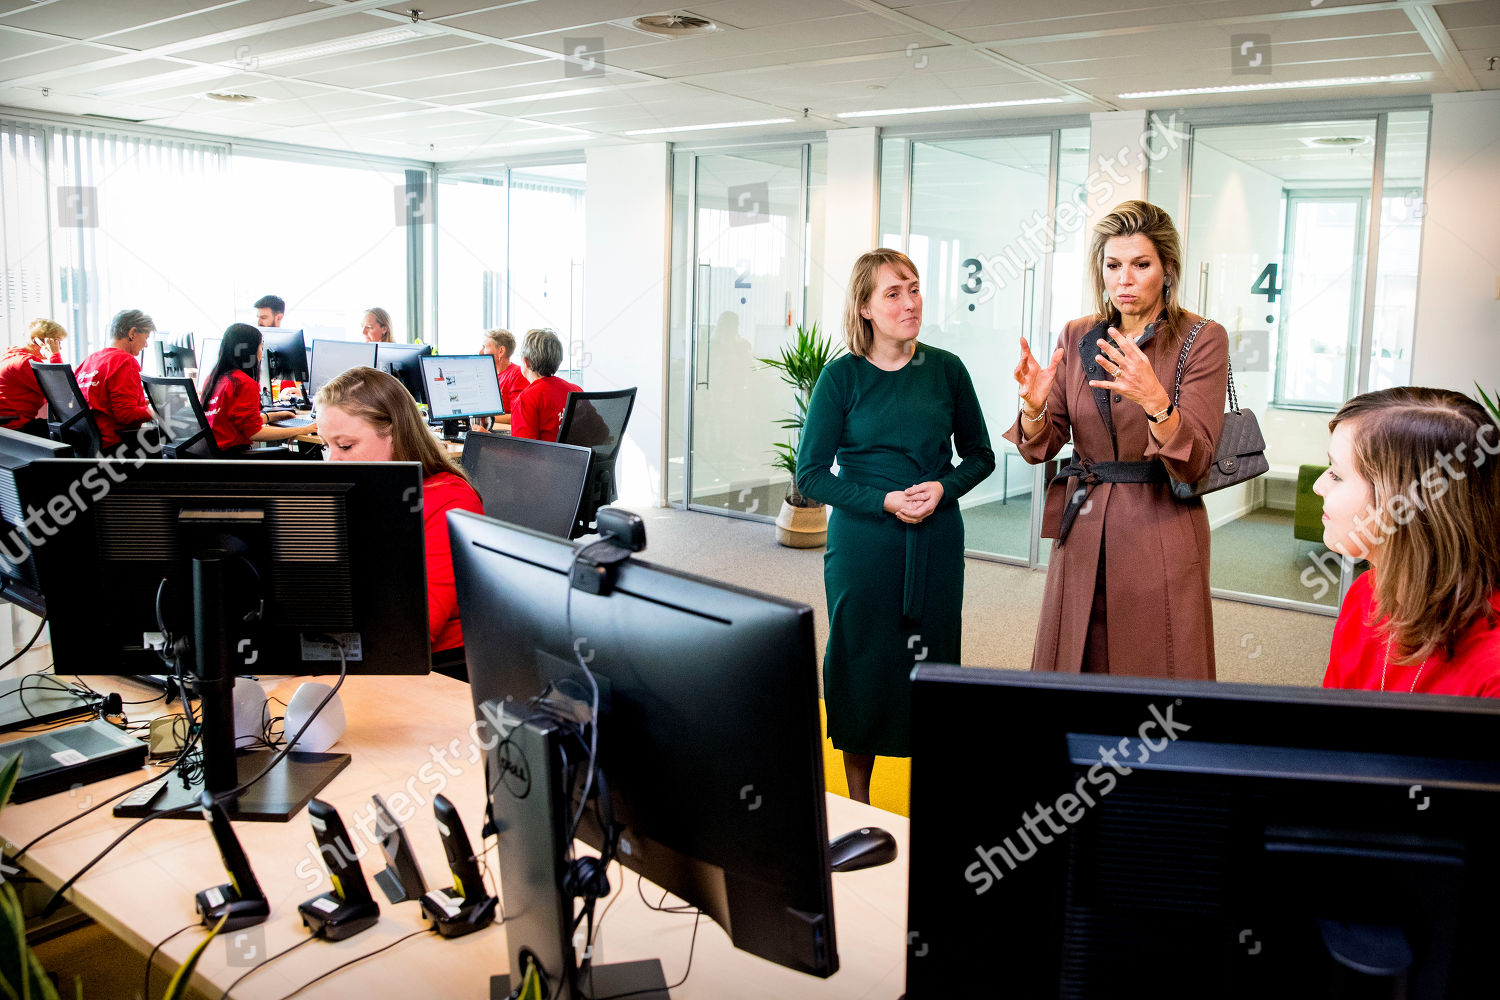 queen-maxima-visit-to-113-suicide-prevention-amsterdam-the-netherlands-shutterstock-editorial-9958922d.jpg